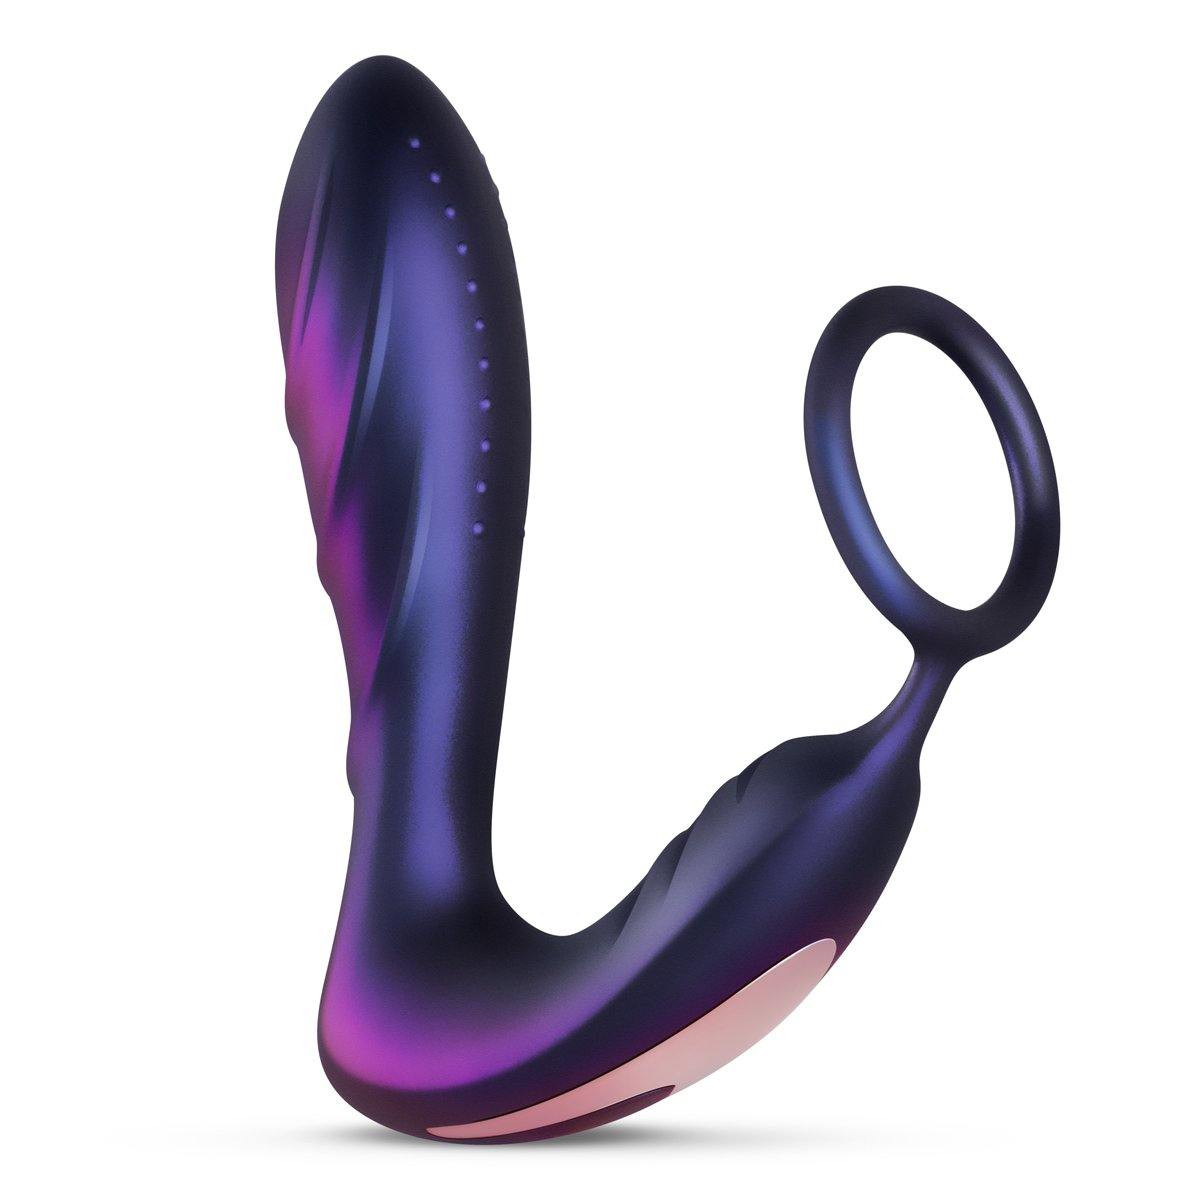 Hueman Black Hole Anal Vibrator With Cockring - Buy At Luxury Toy X - Free 3-Day Shipping